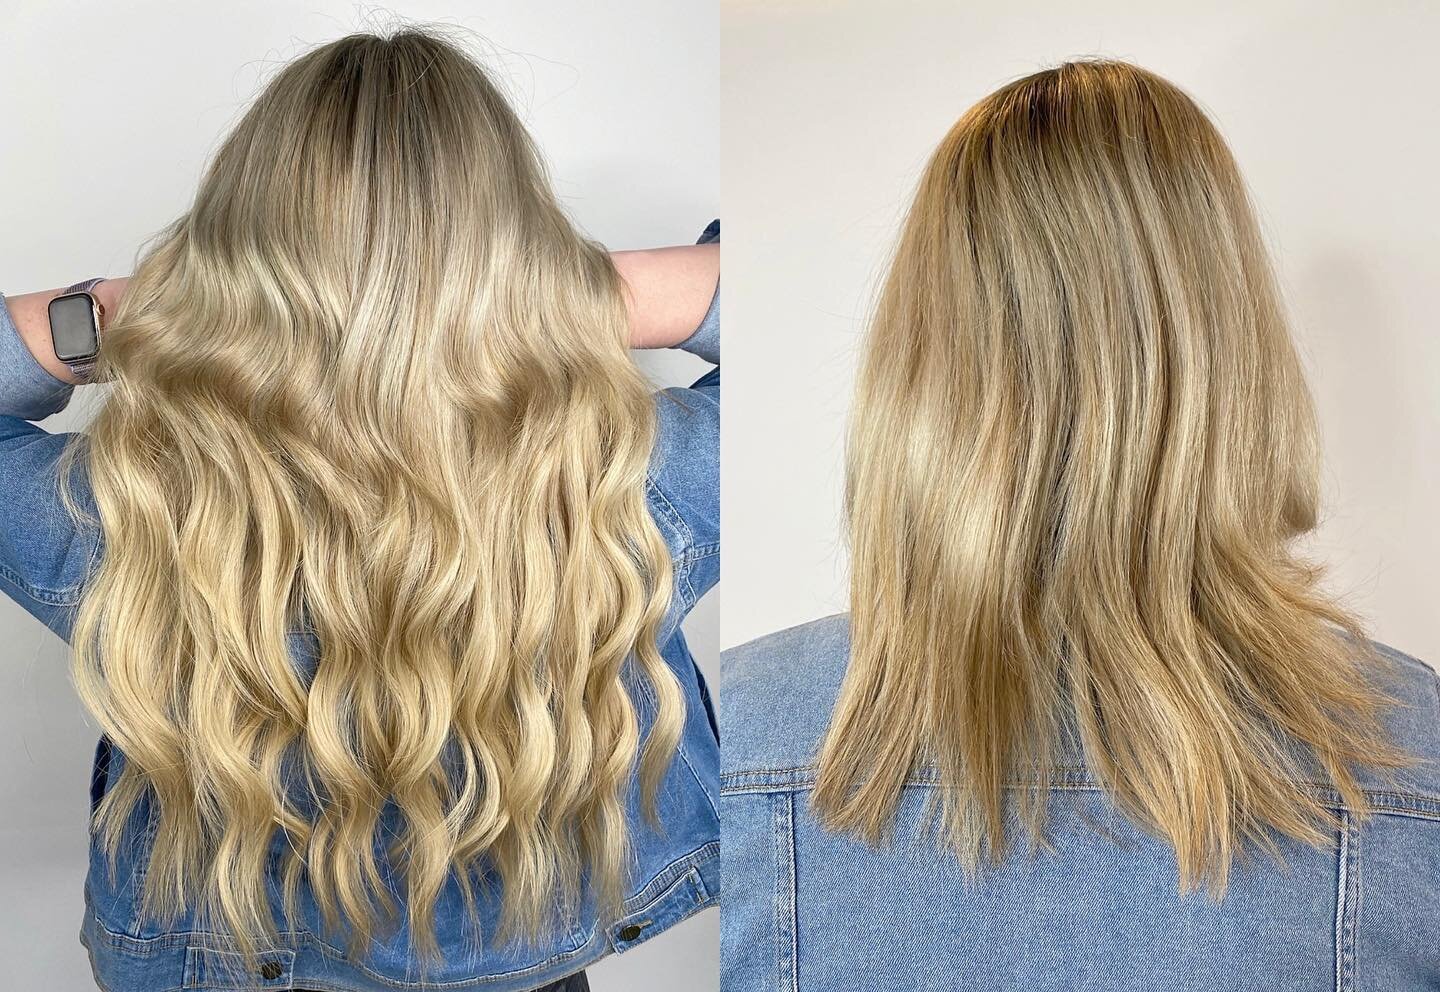 Who&rsquo;s ready for longer hair?!

.
.

This babe is rocking 20&rsquo;s and looking sooo good! Believe it or not, 20&rsquo;s aren&rsquo;t the correct fit for everyone though. 

.

This is why consultations are so important. We make sure you get wha